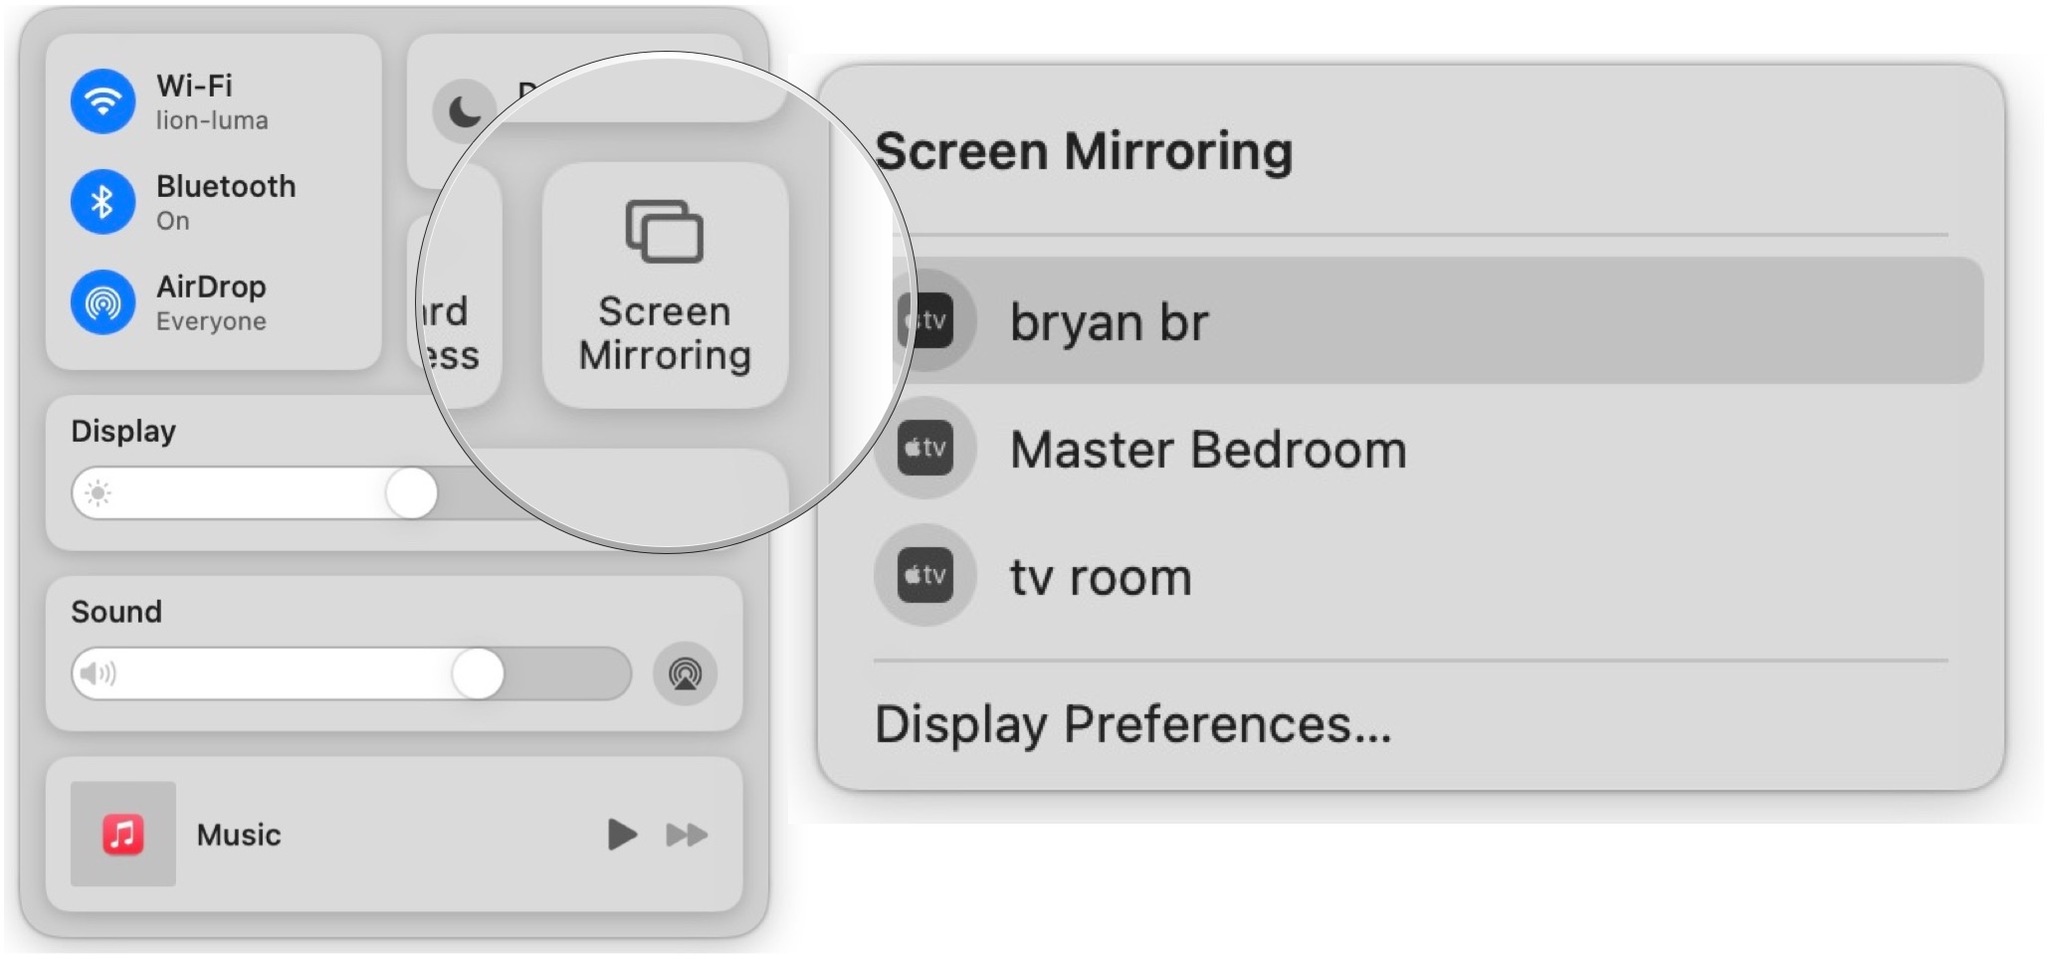 How To Airplay Apple Tv On Iphone, How Do I Mirror My Imac To Apple Tv Airplay